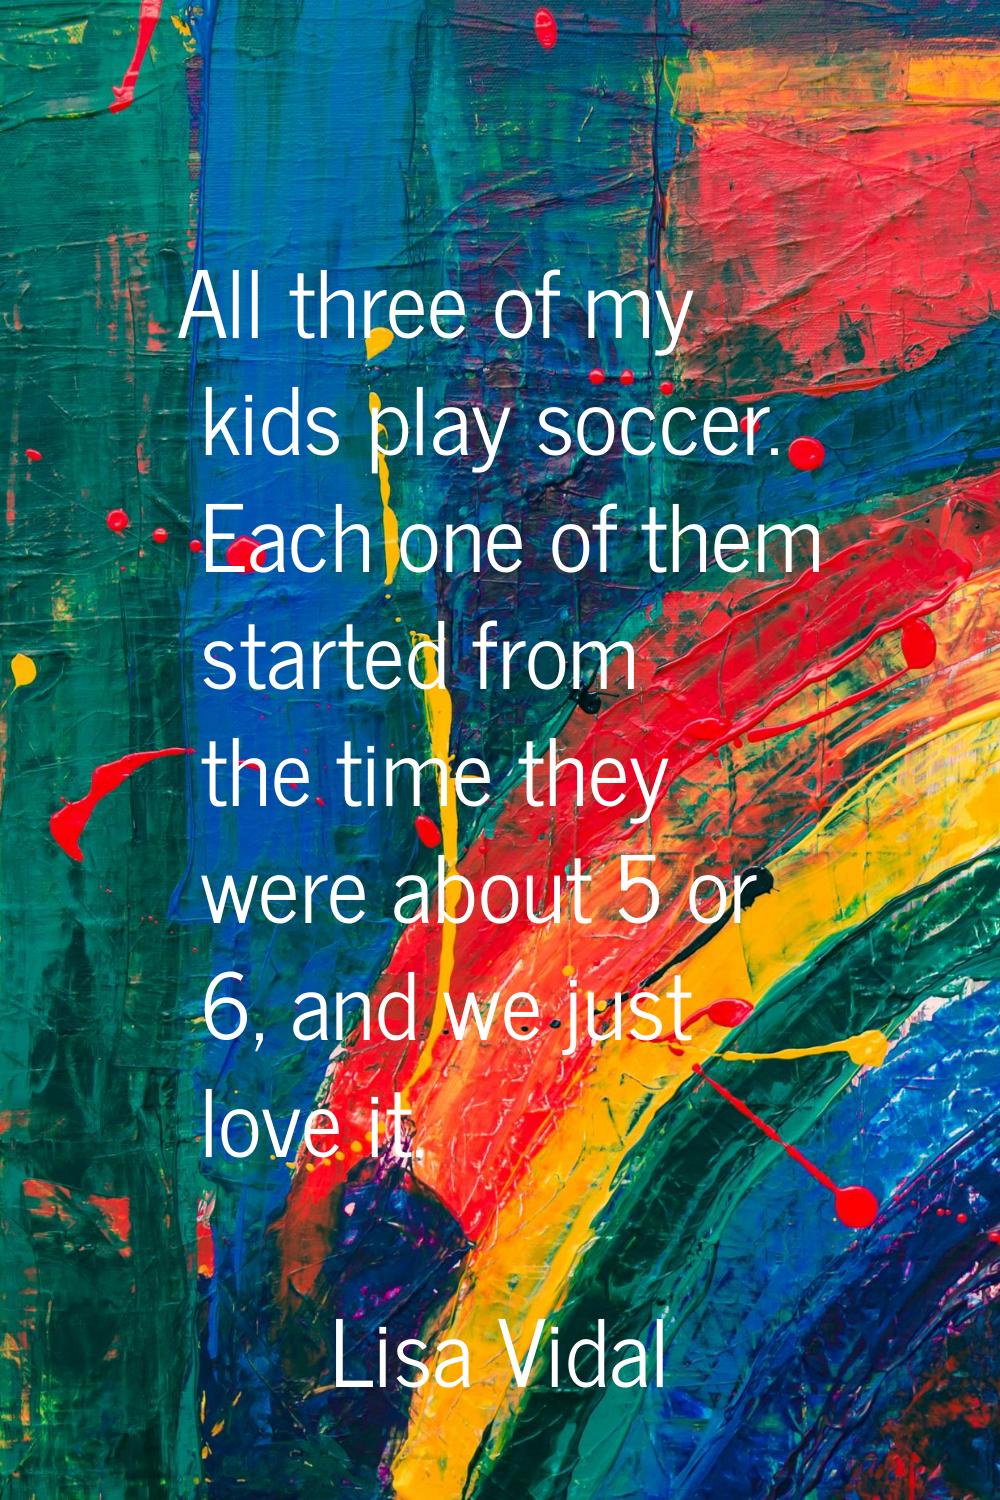 All three of my kids play soccer. Each one of them started from the time they were about 5 or 6, an